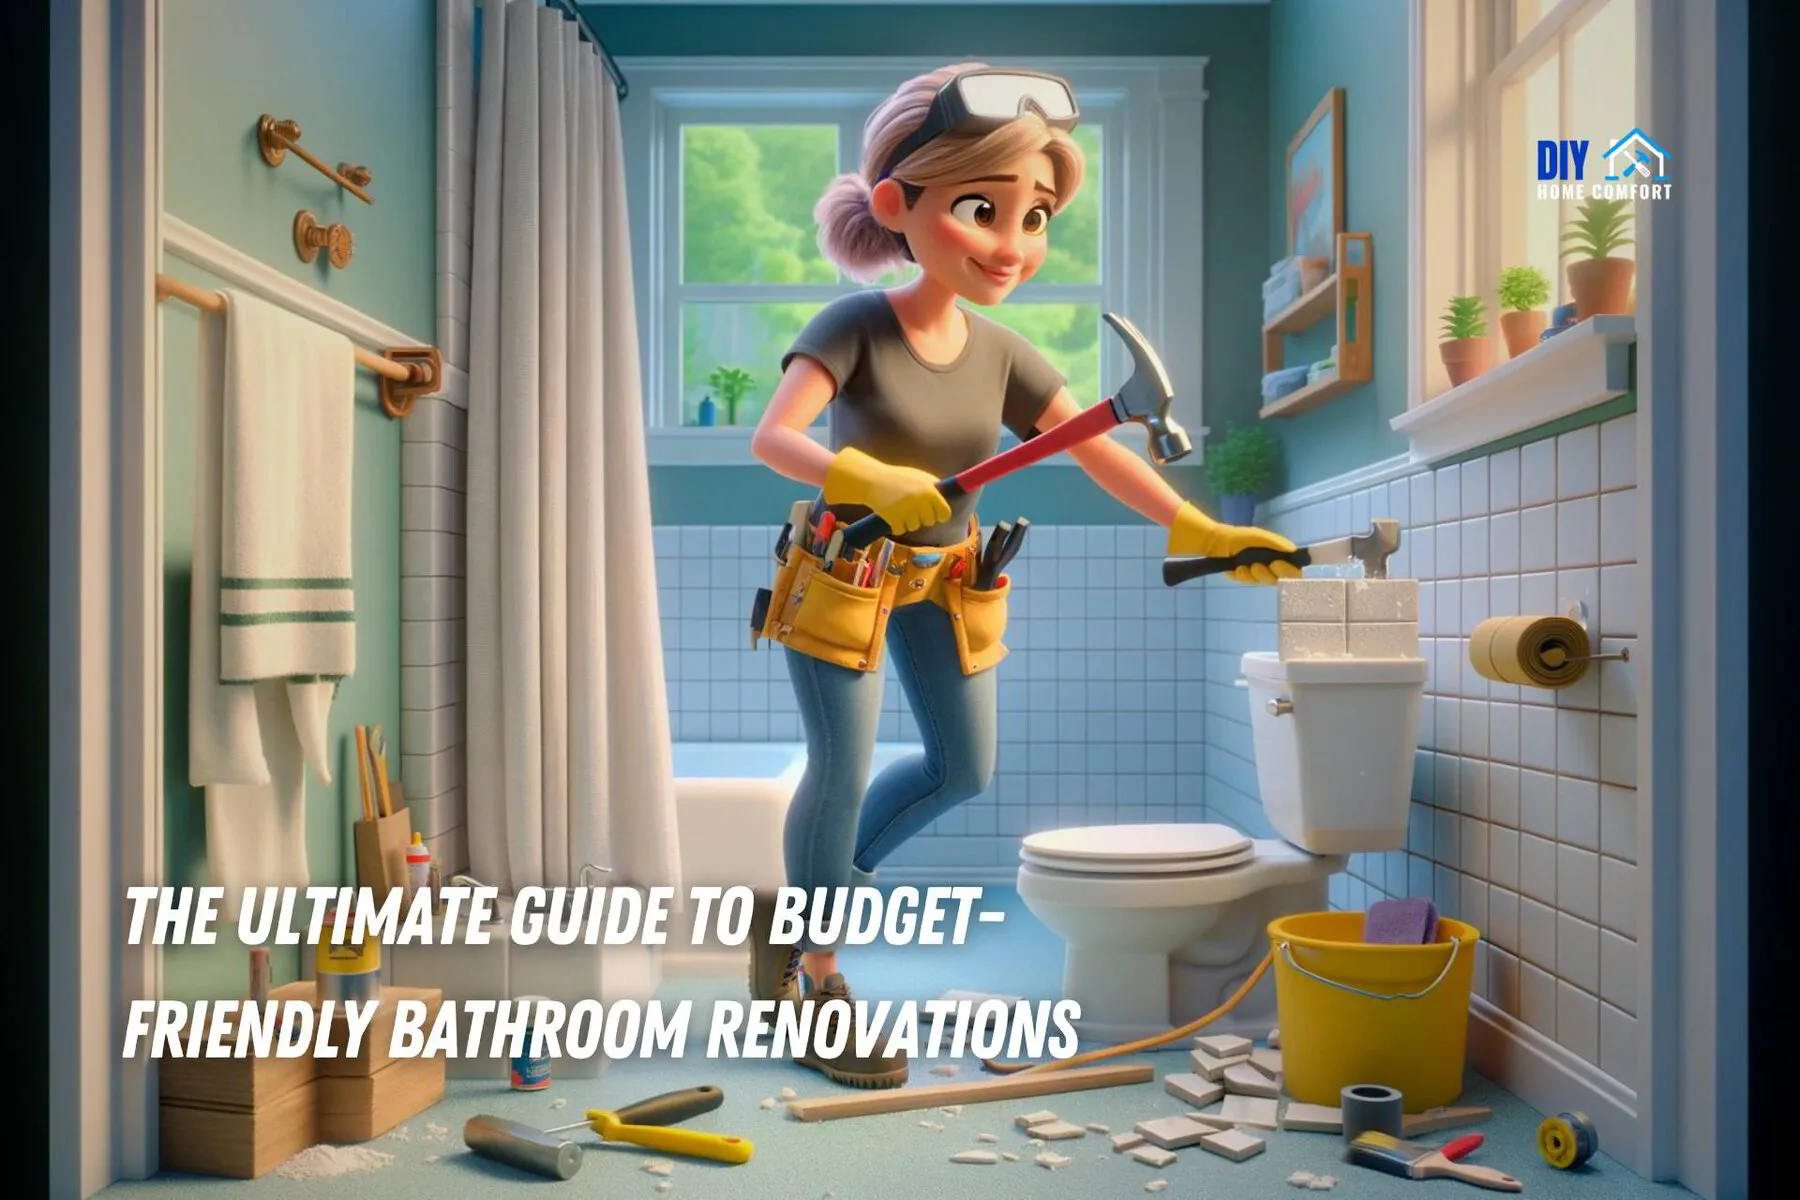 The Ultimate Guide to Budget-Friendly Bathroom Renovations | DIY Home Comfort